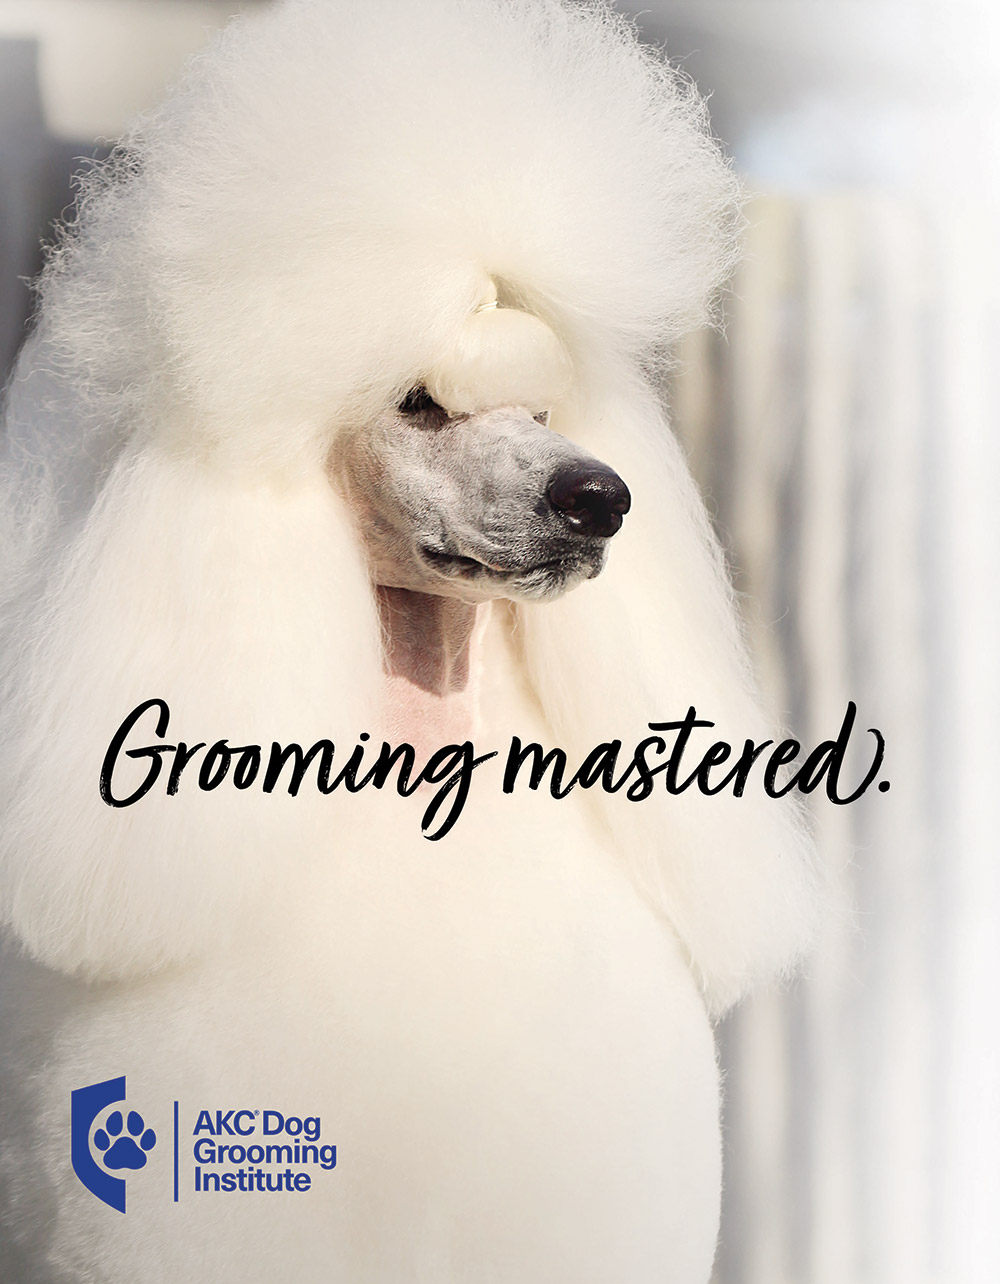 AKC Dog Grooming Institute Advertisement